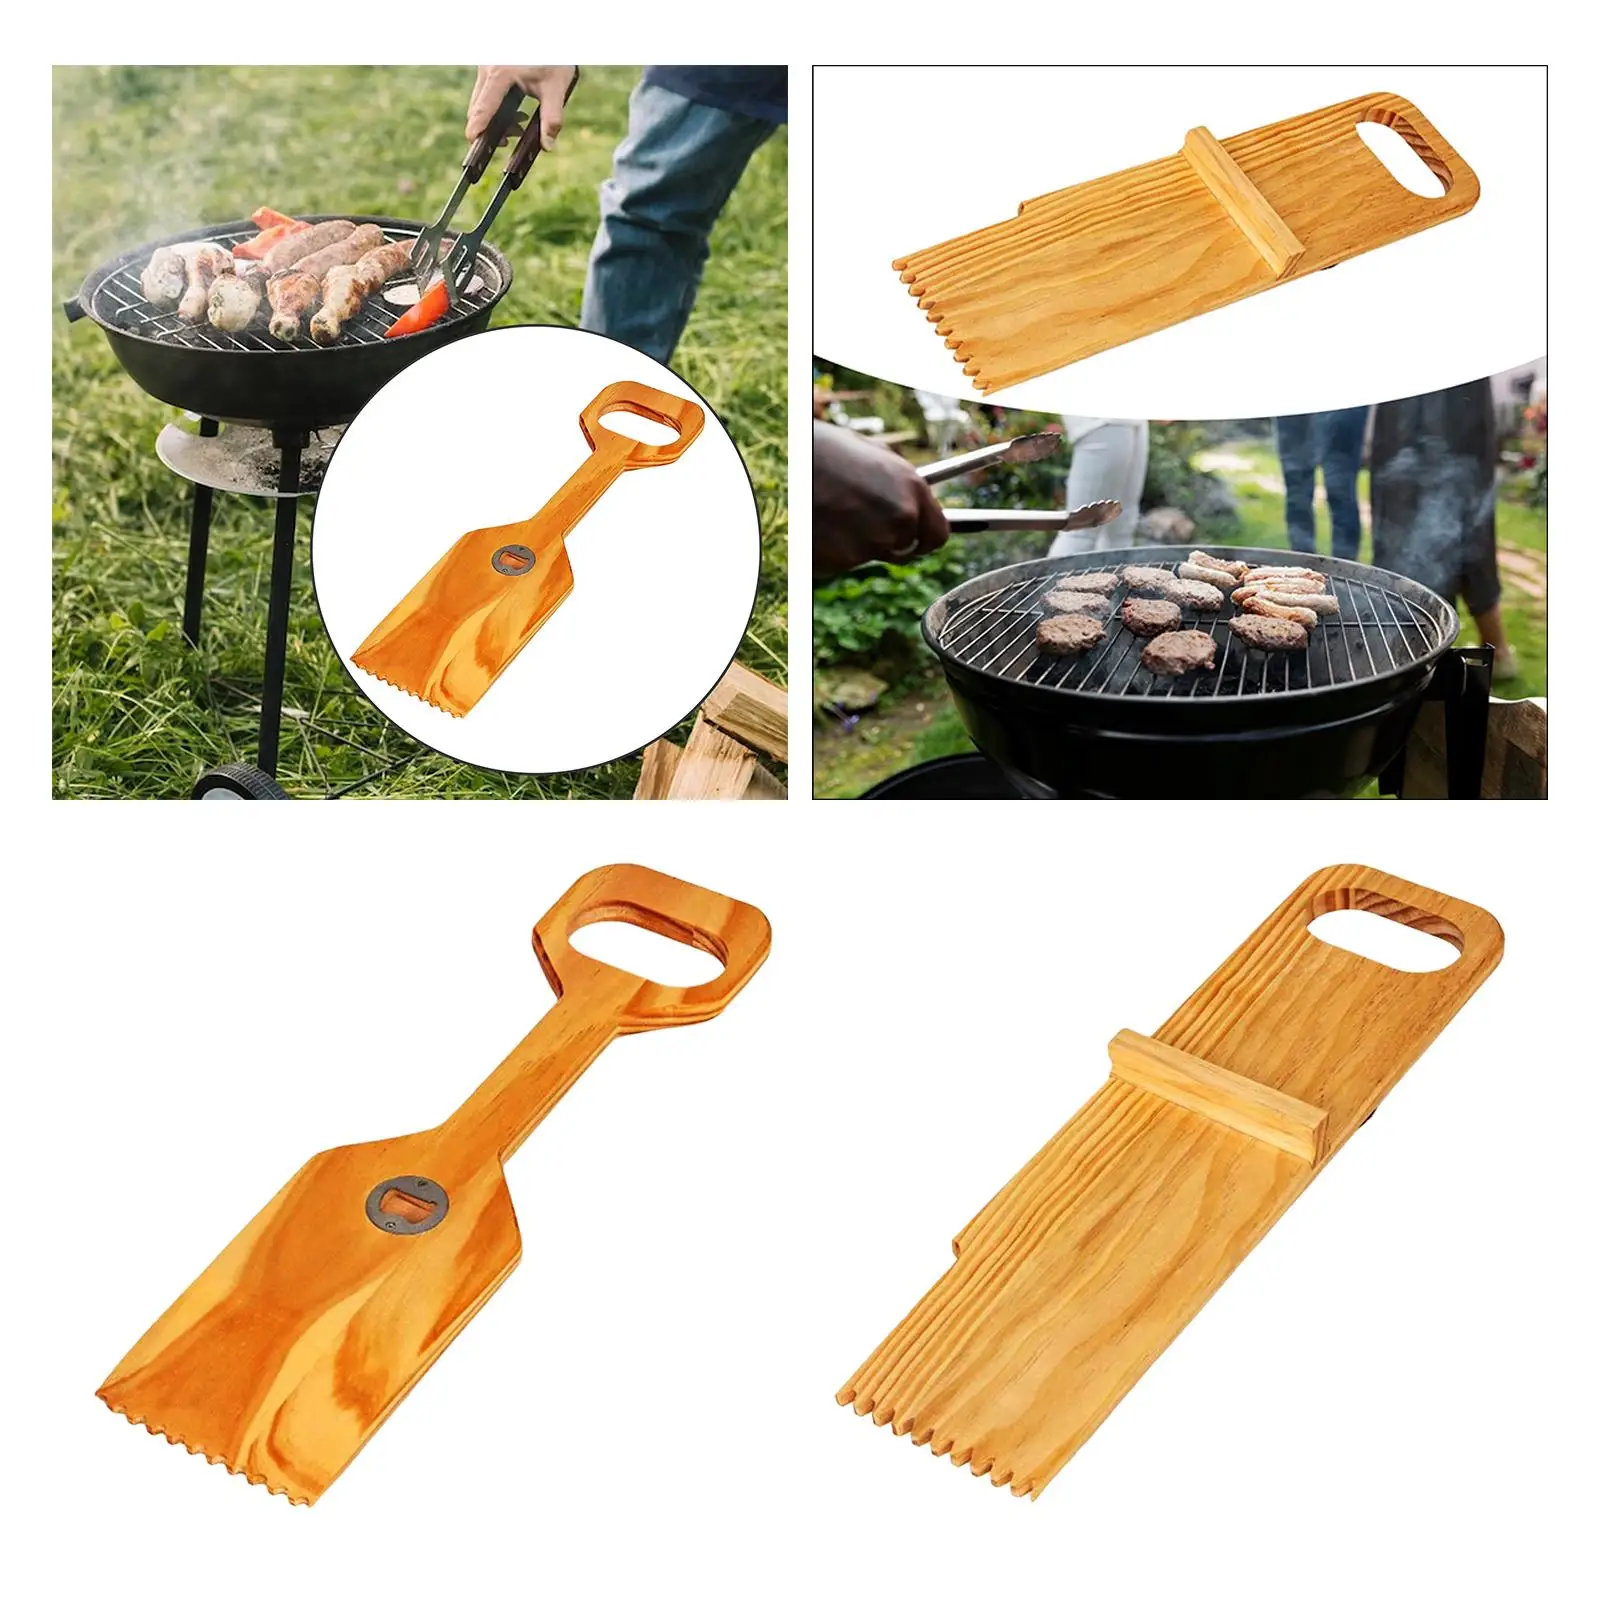 Wooden Grill Scraper Cookware Flat Barbecue Turners for Turning Serving Frying